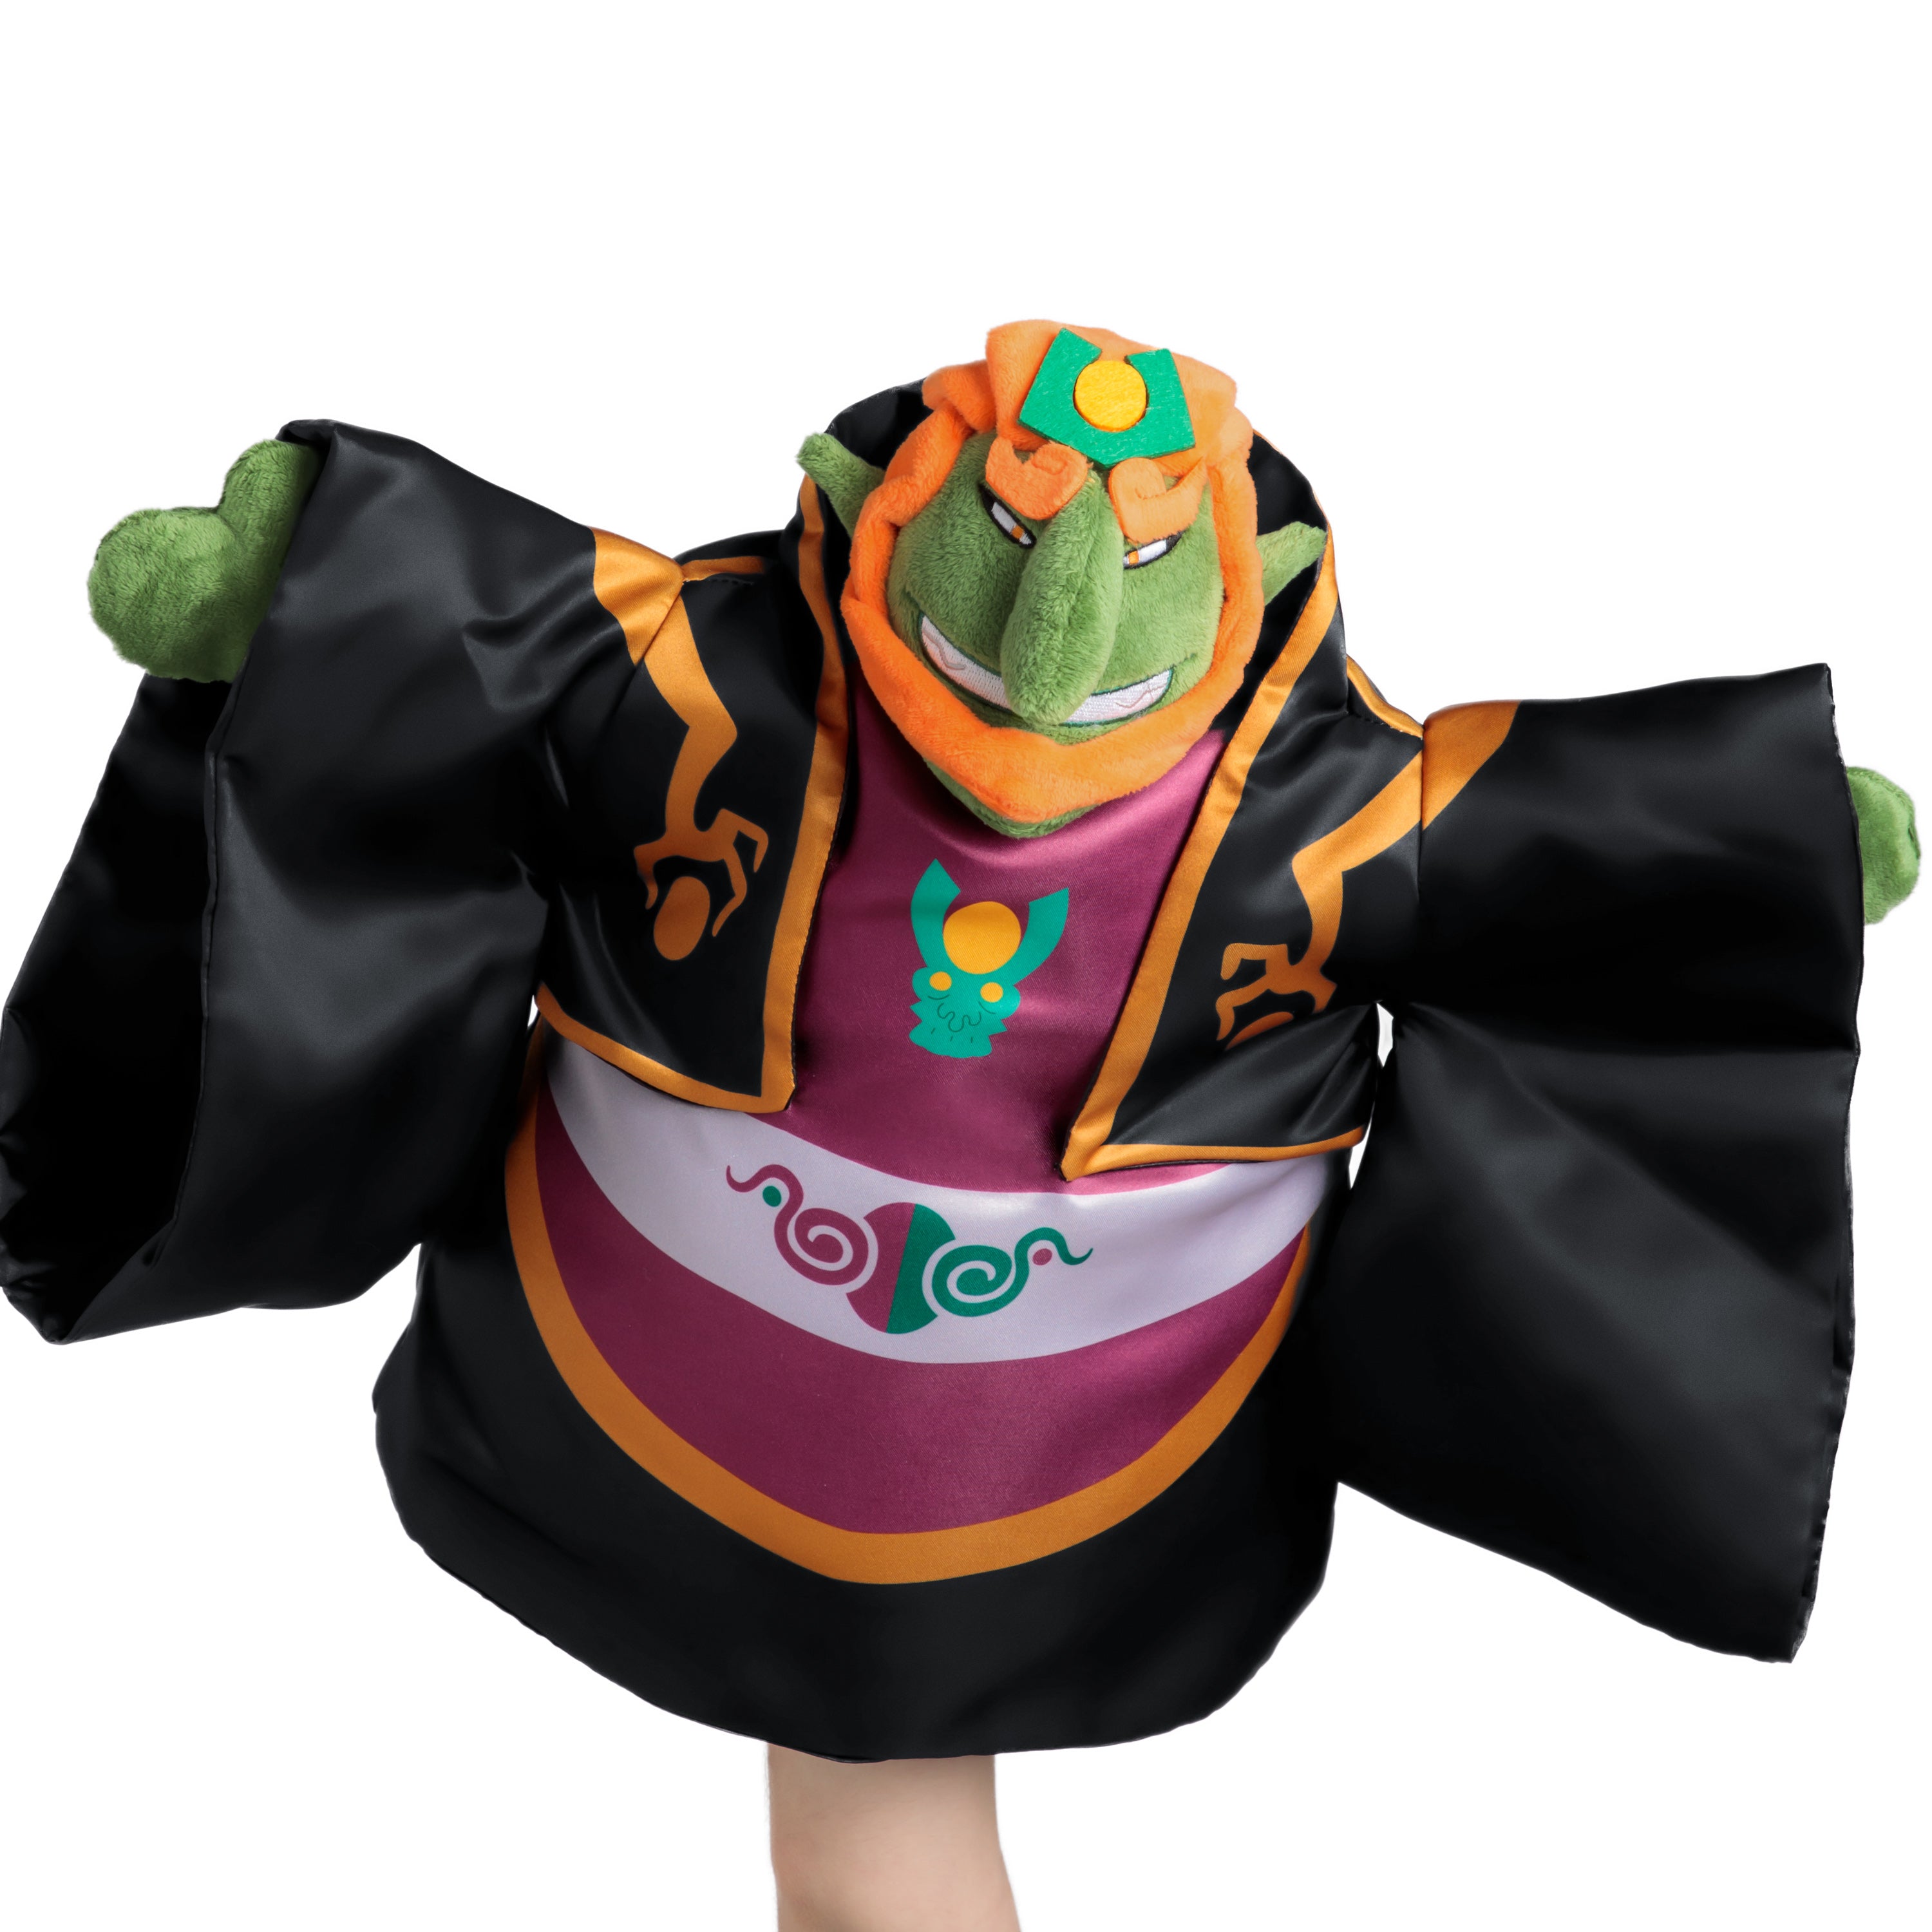 Official Ganon stuffed toy by Uncute